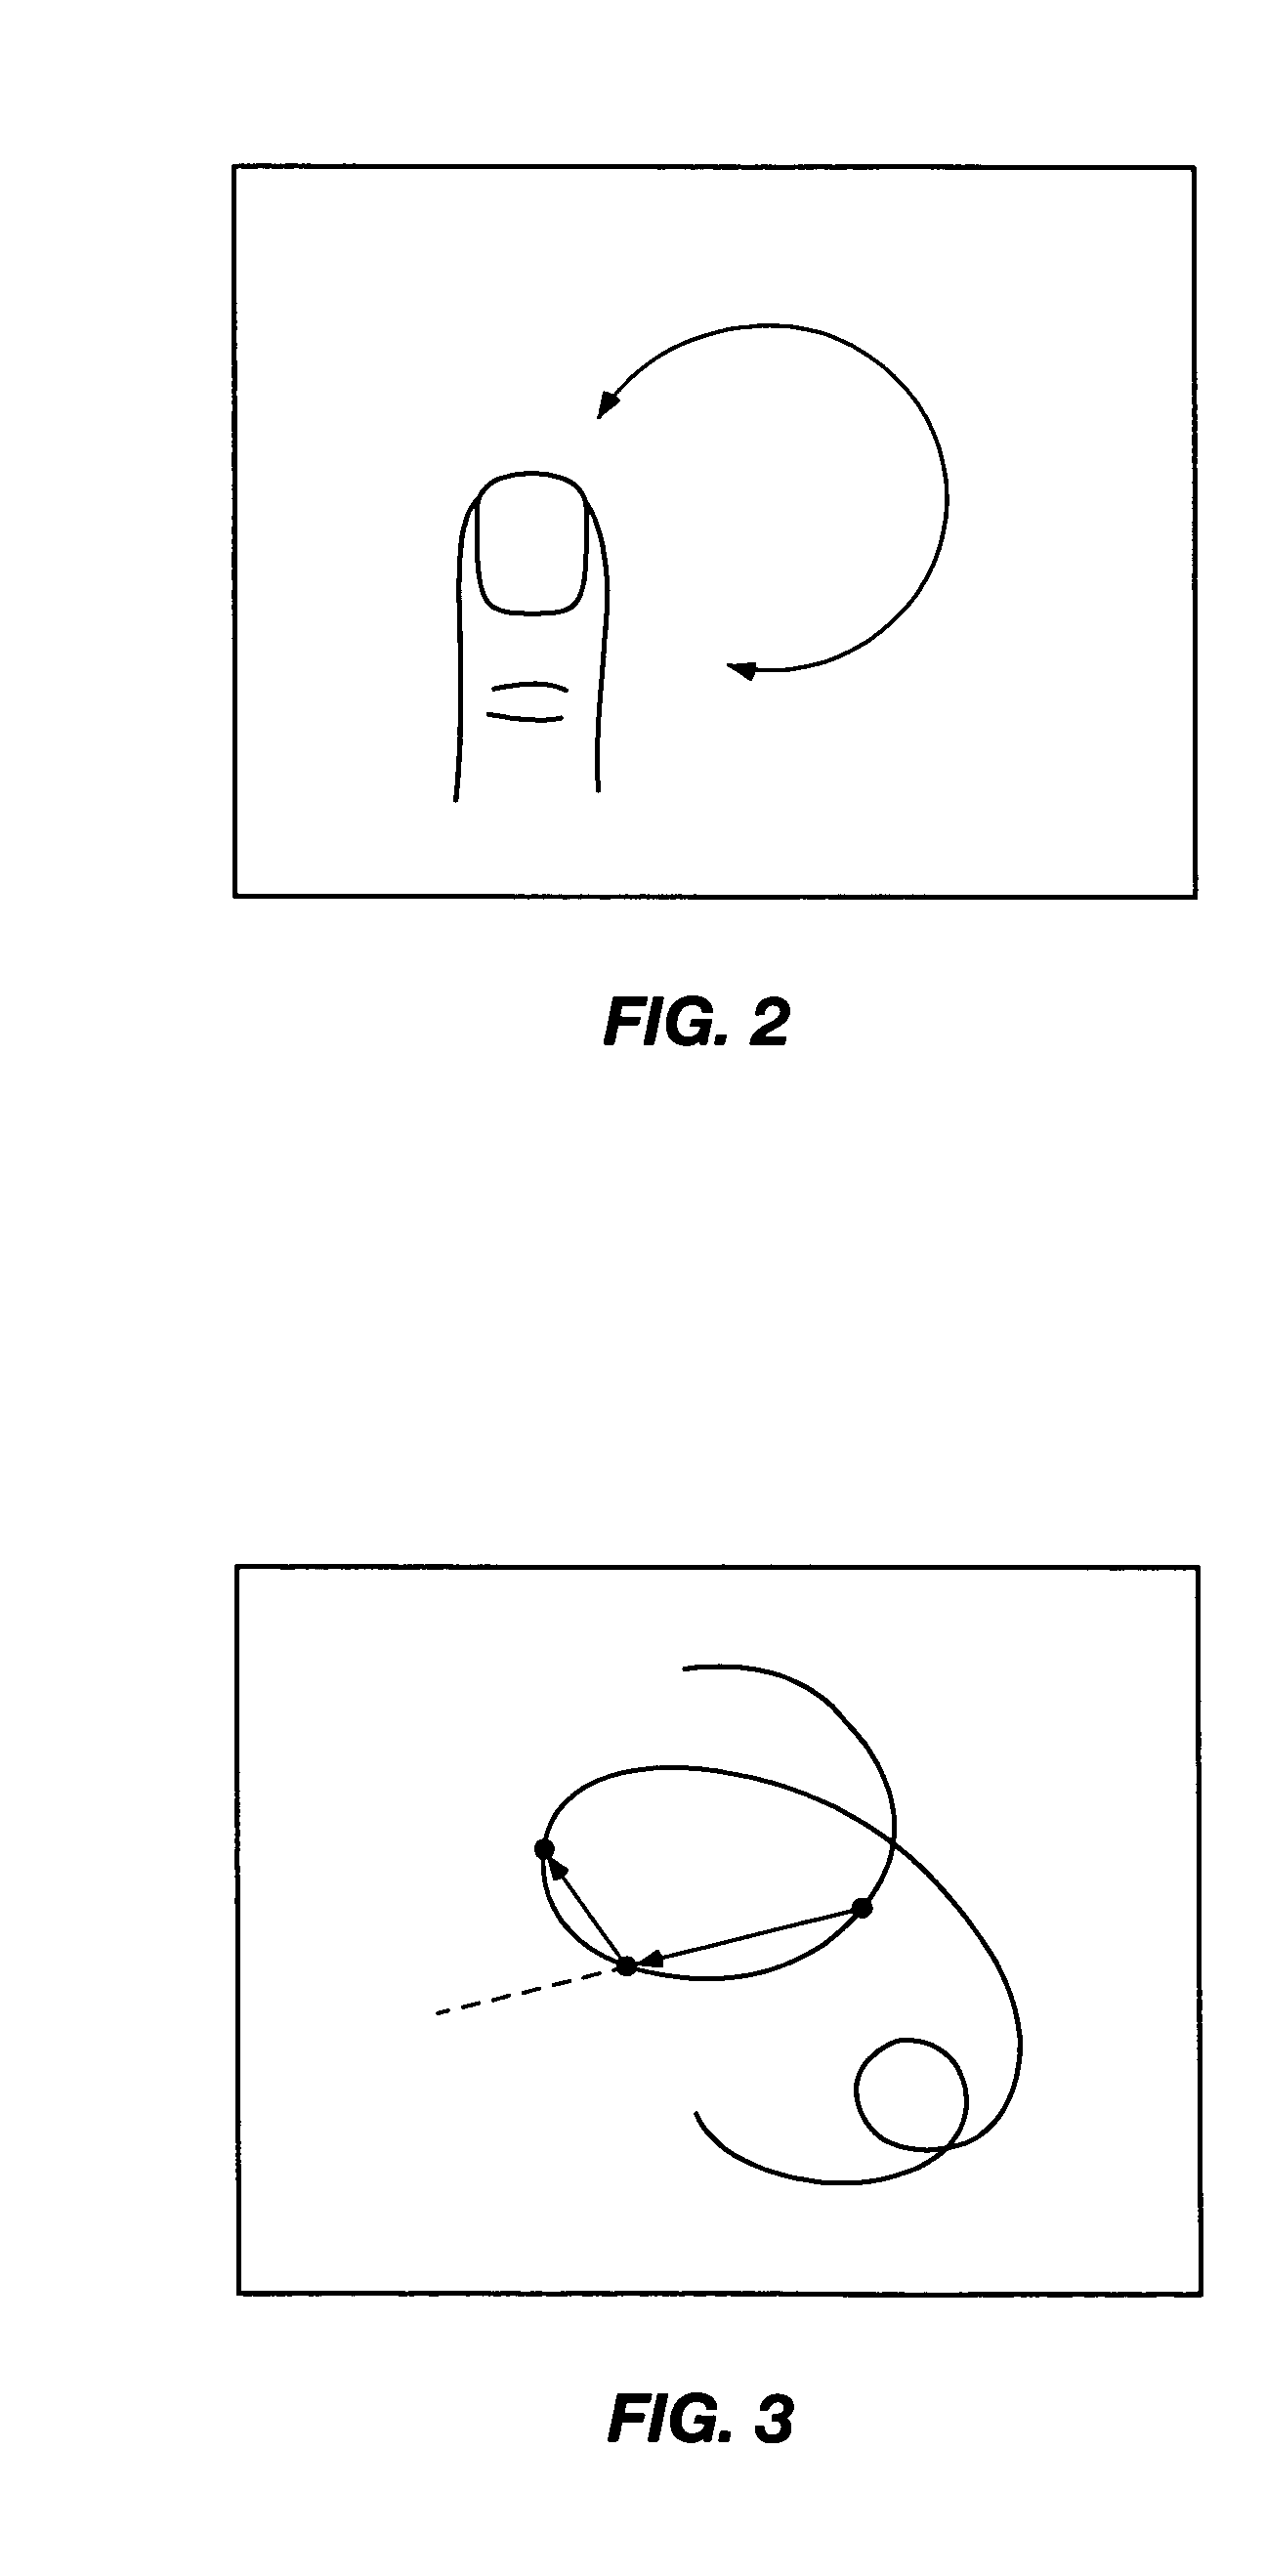 Method and system for performing scrolling by movement of a pointing object in a curvilinear path on a touchpad